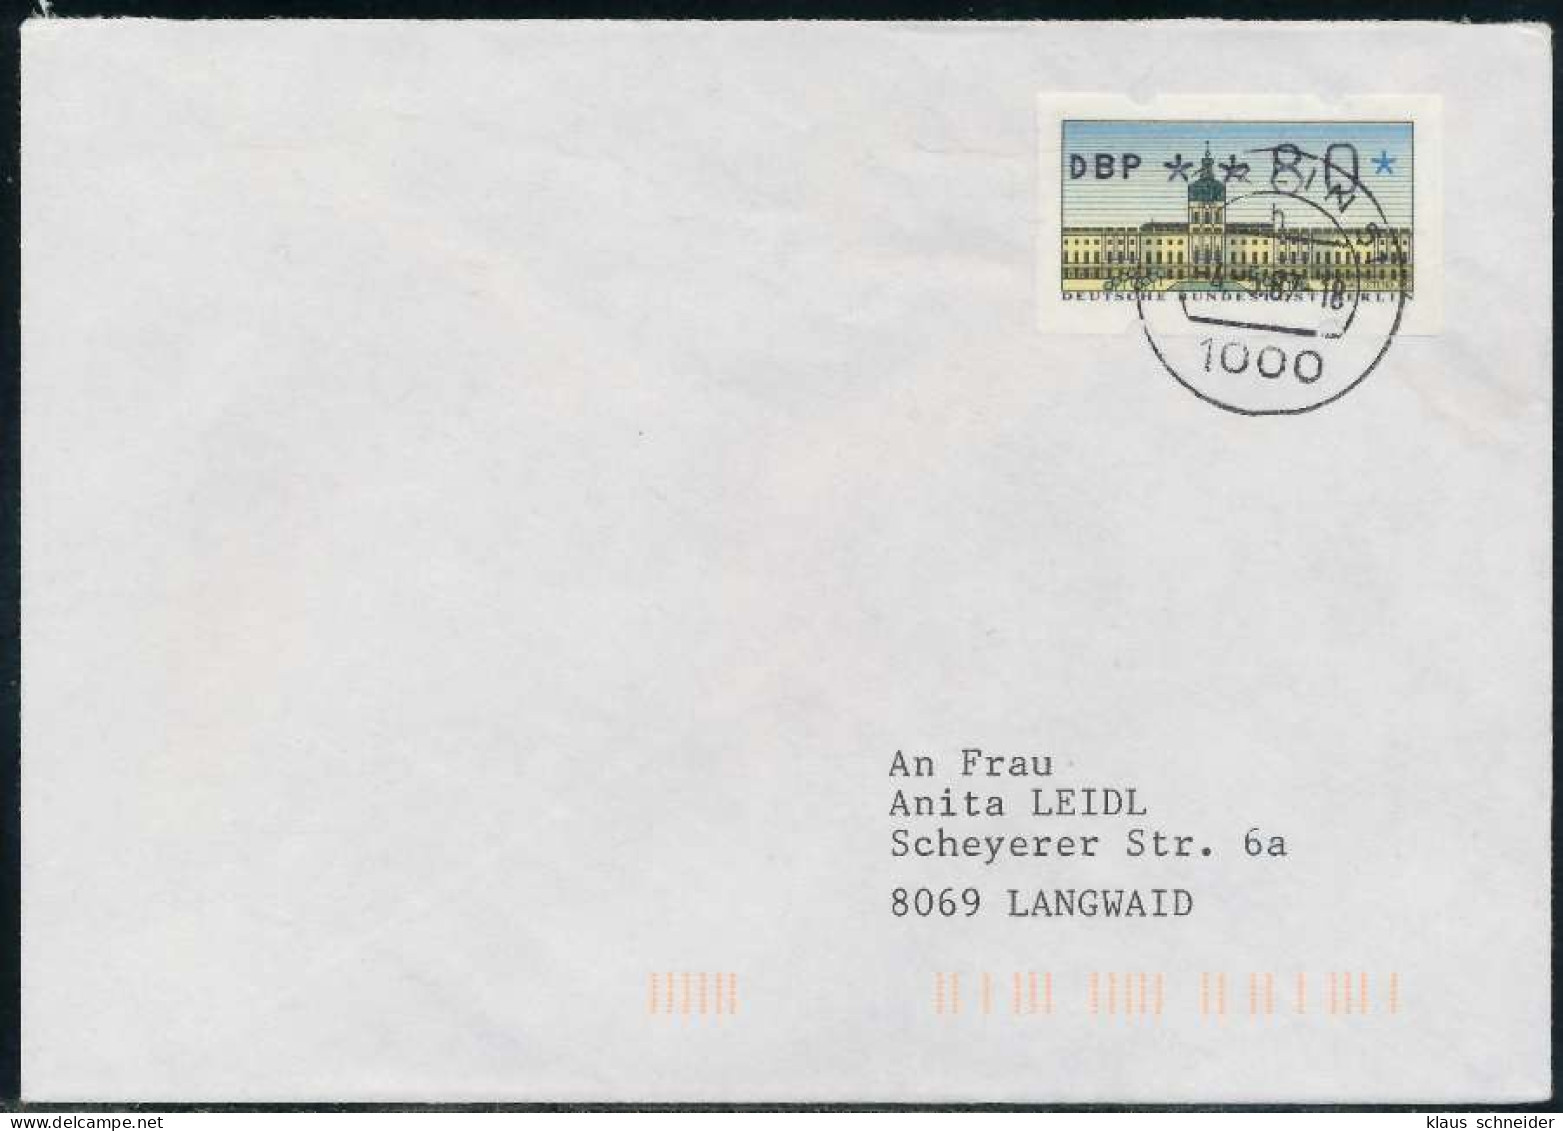 BERLIN ATM 1-080 NORMAL-BRIEF EF FDC X7E46BE - Covers & Documents